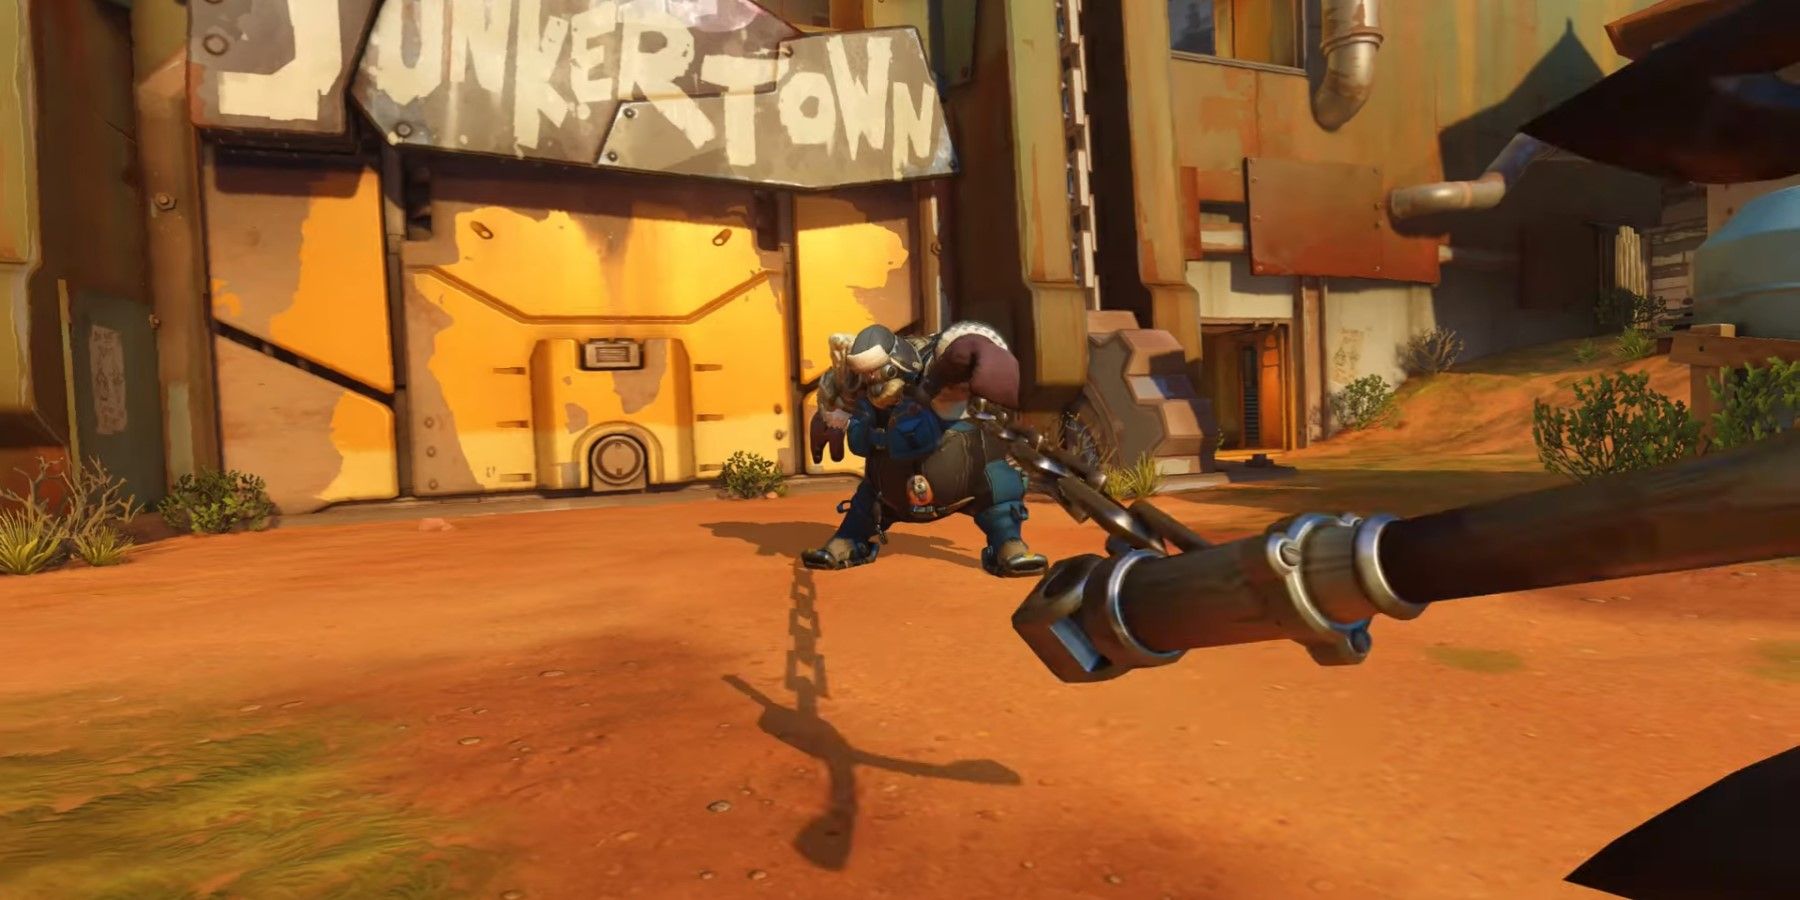 the ice fisher roadhog skin from OW2 hooking the camera on junkertown